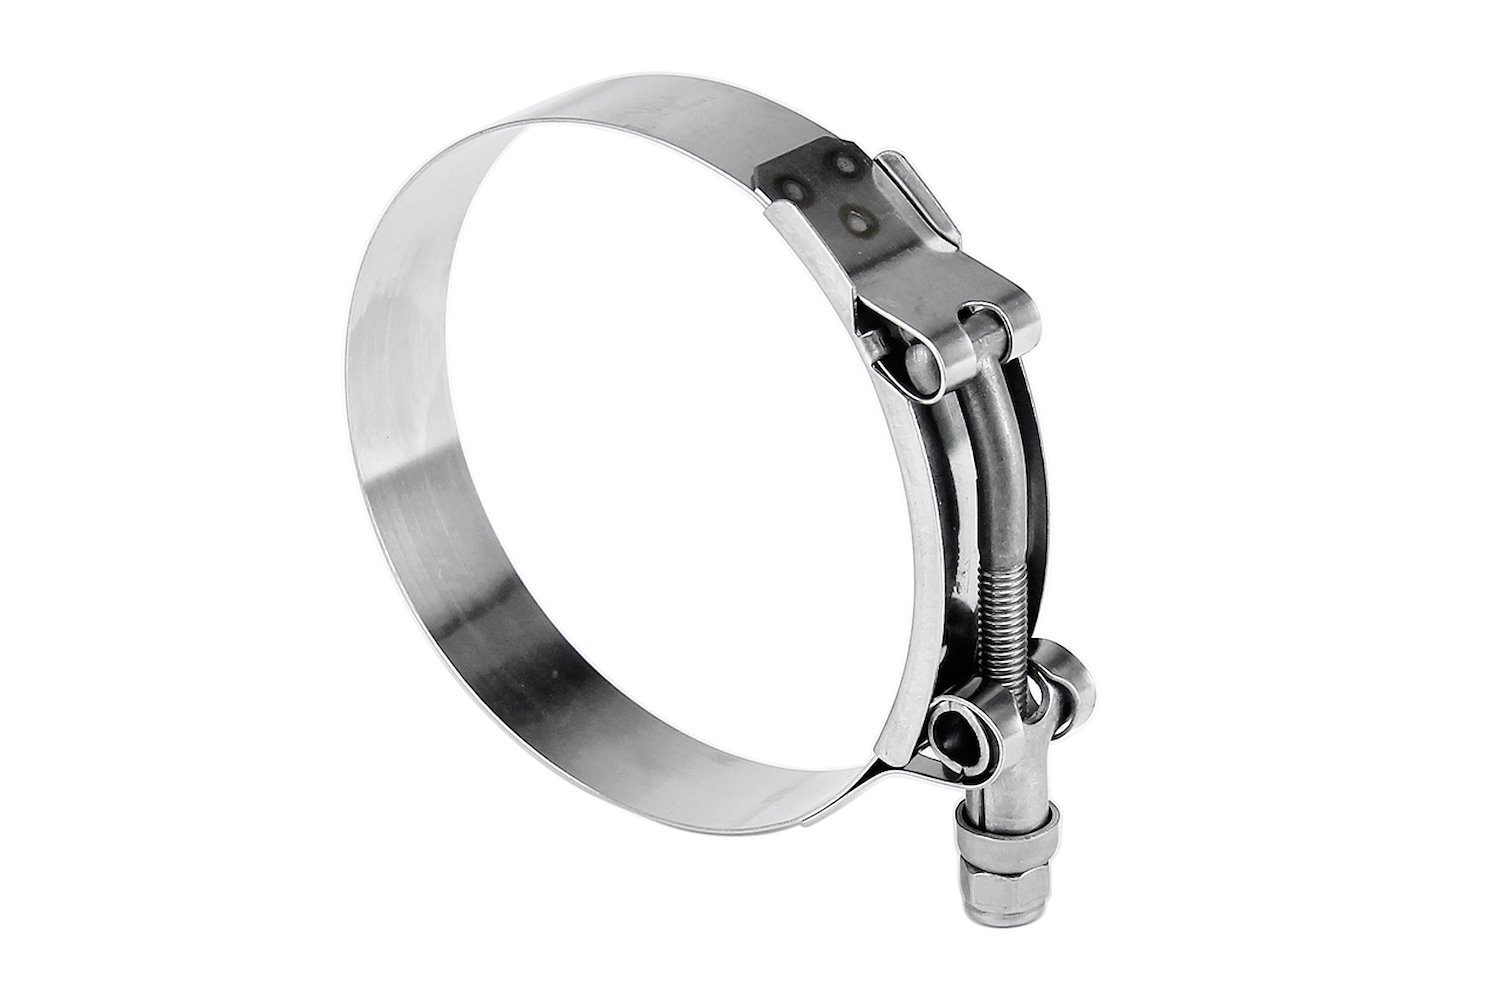 316-SSTC-121-129 100-Percent Marine Grade Stainless Steel T-Bolt Hose Clamp, Size #124, Range: 4.76 in.- 5.08 in.